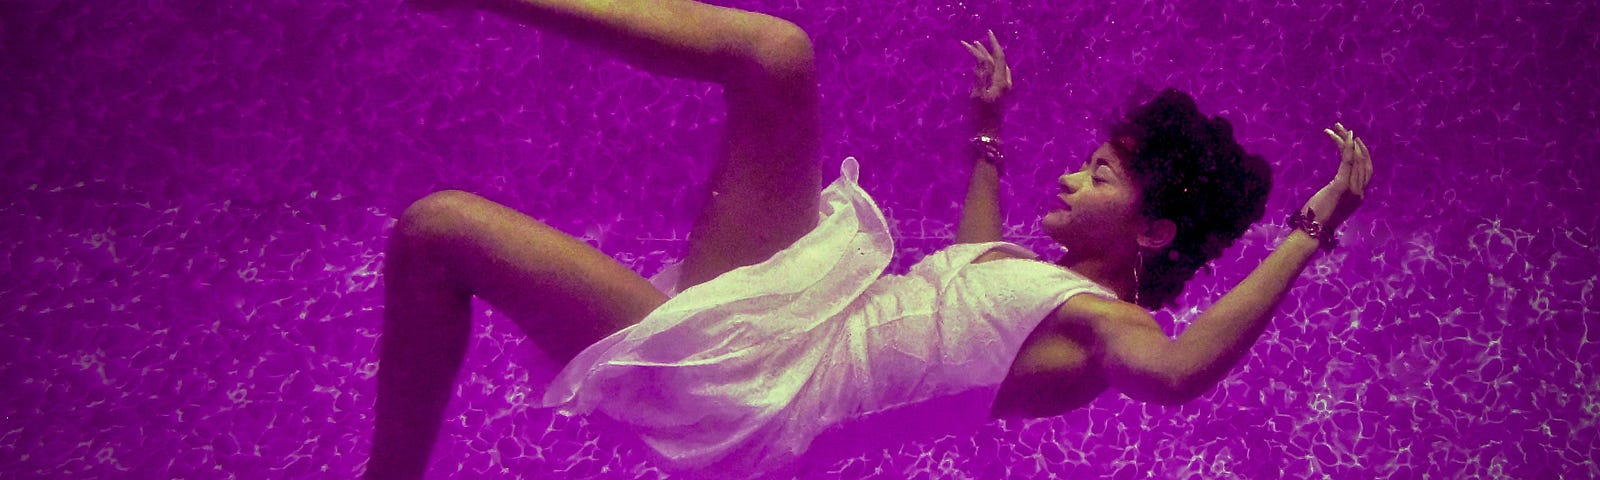 Woman Floating in Purple Where Do I Go When I Sleep Astral Travel Story by Gemini May